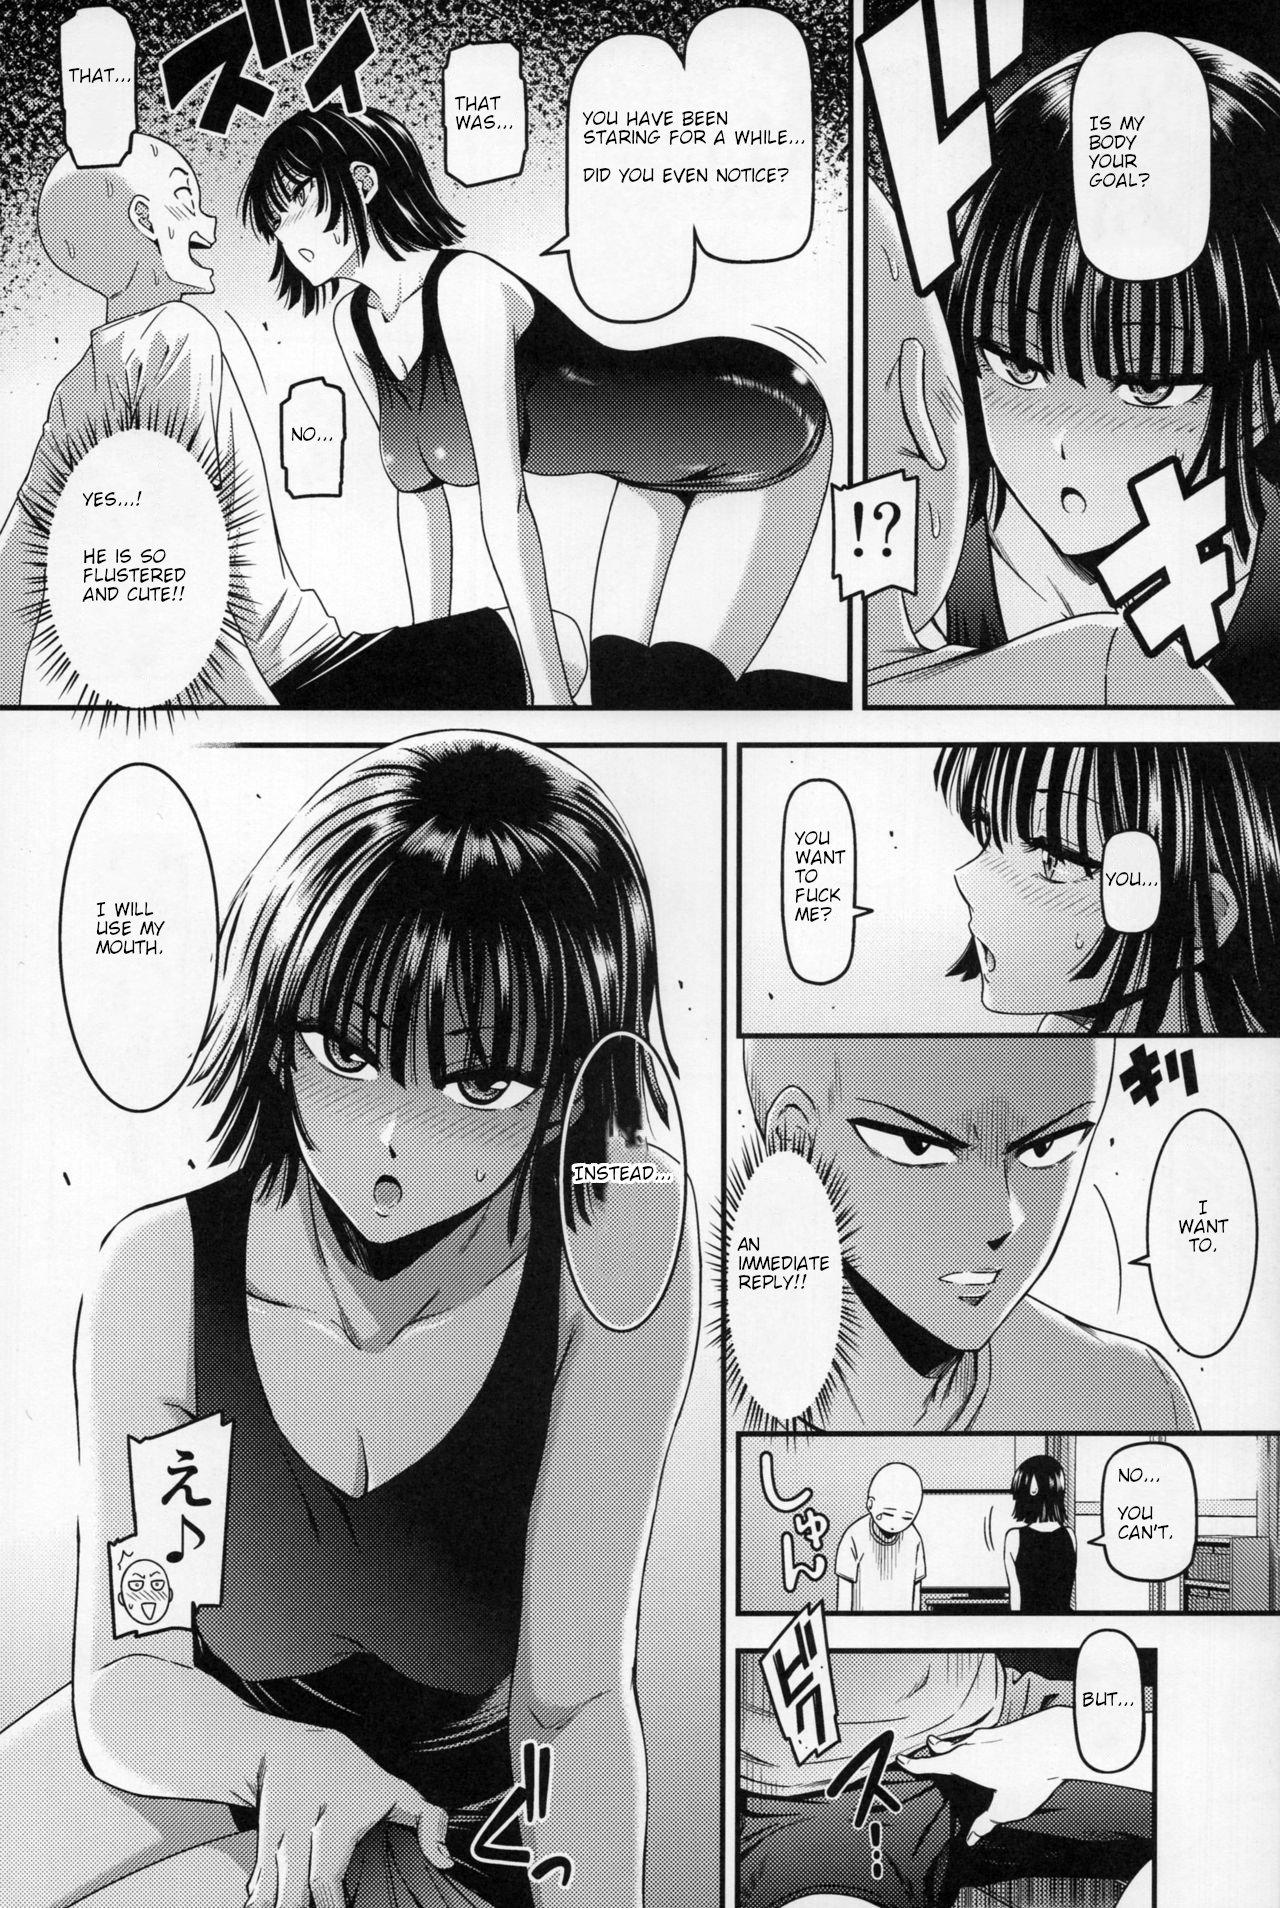 Suruba ONE-HURRICANE 6 - One punch man Best Blowjobs - Page 9